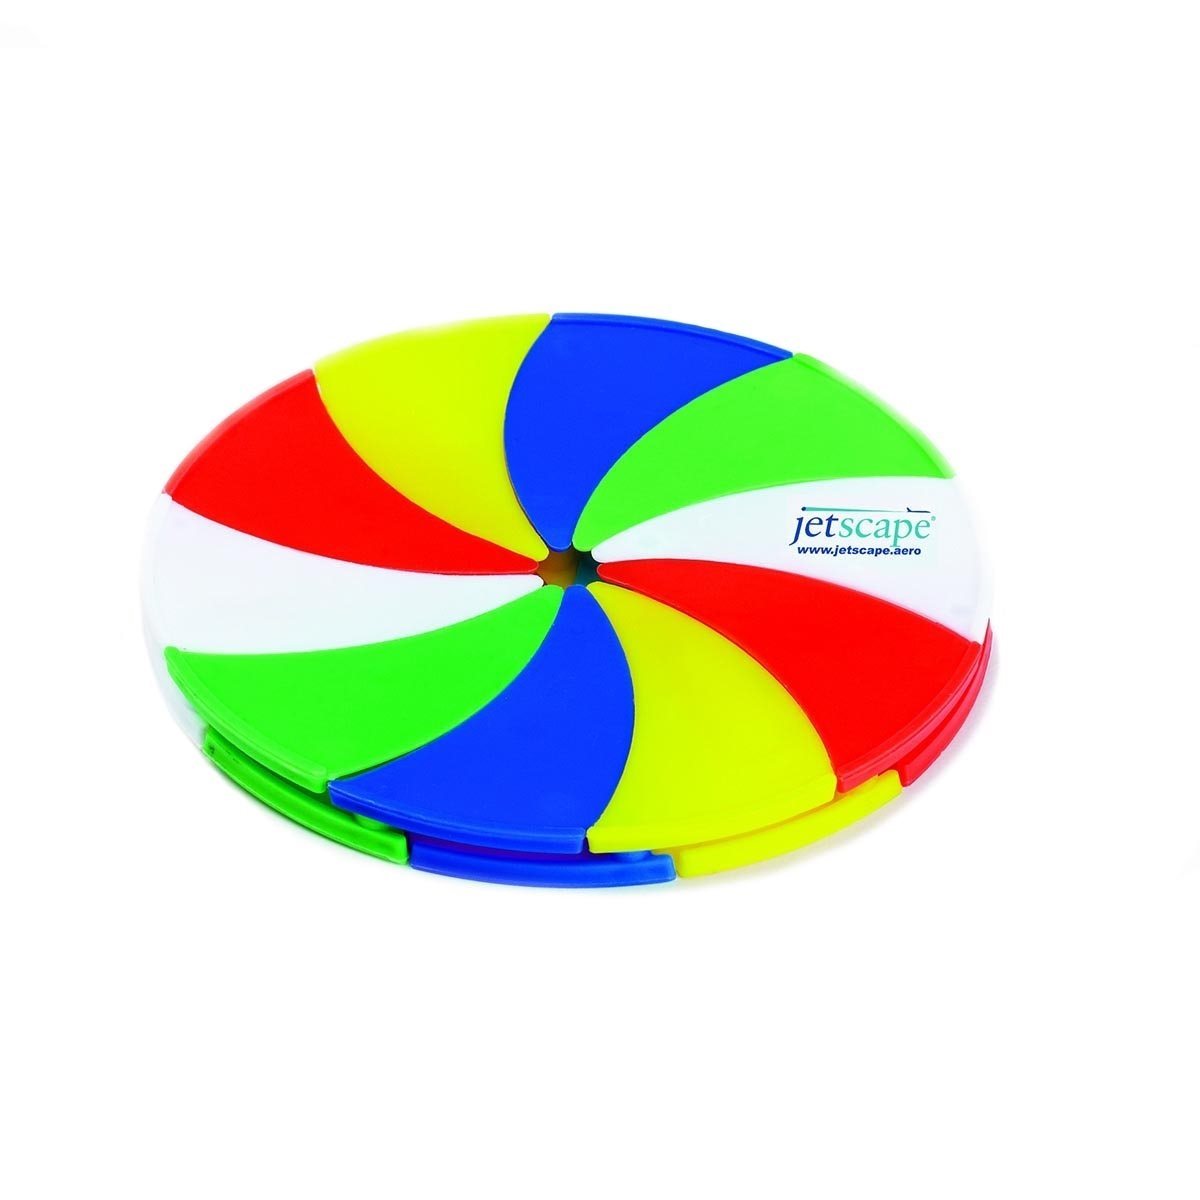 How do branded frisbees benefit my brand?